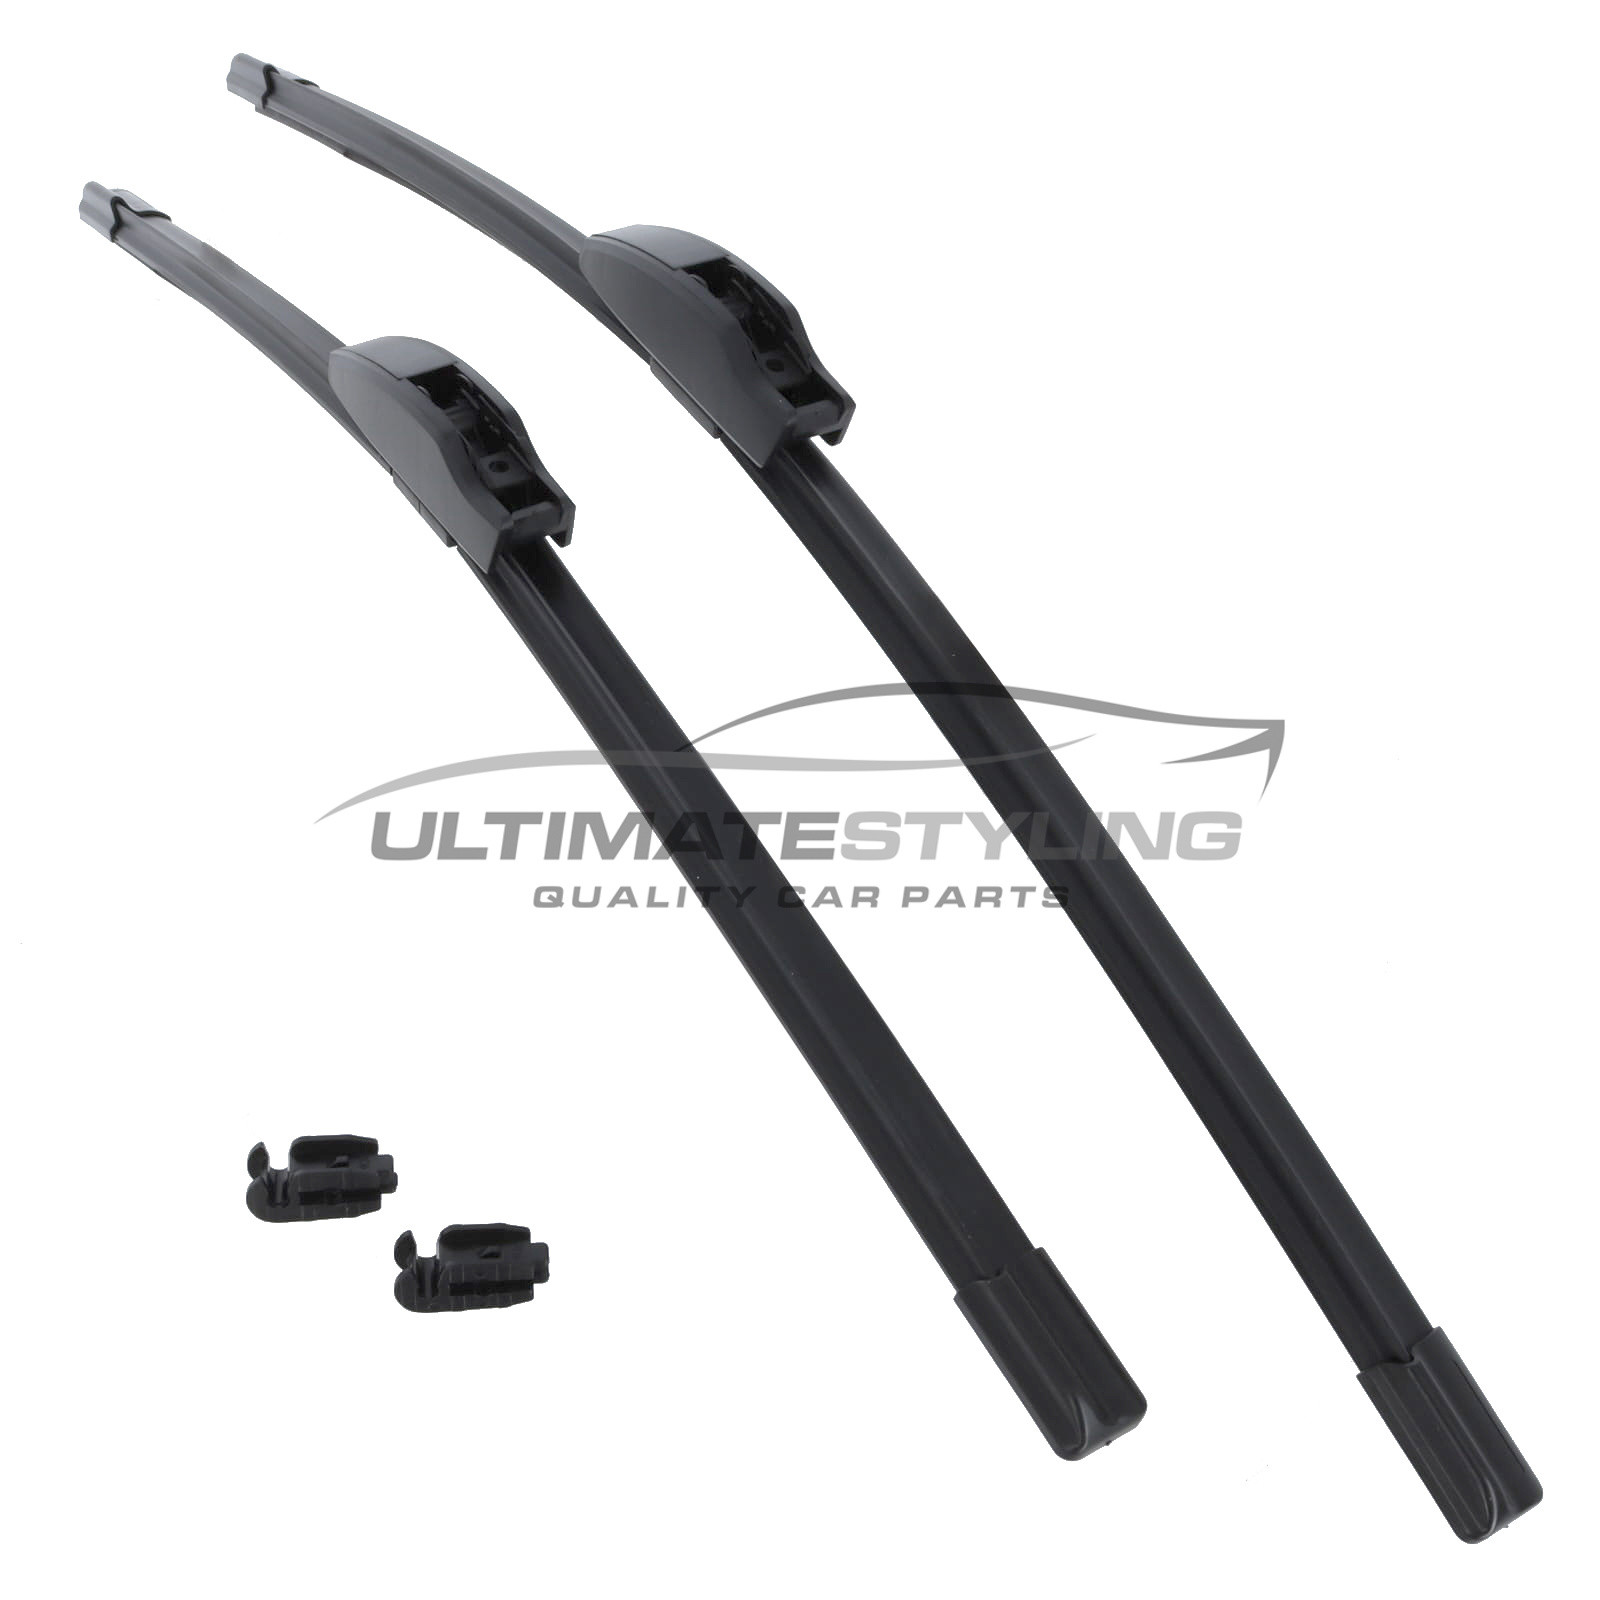 Drivers Side & Passenger Side (Front) Wiper Blades for Isuzu Rodeo